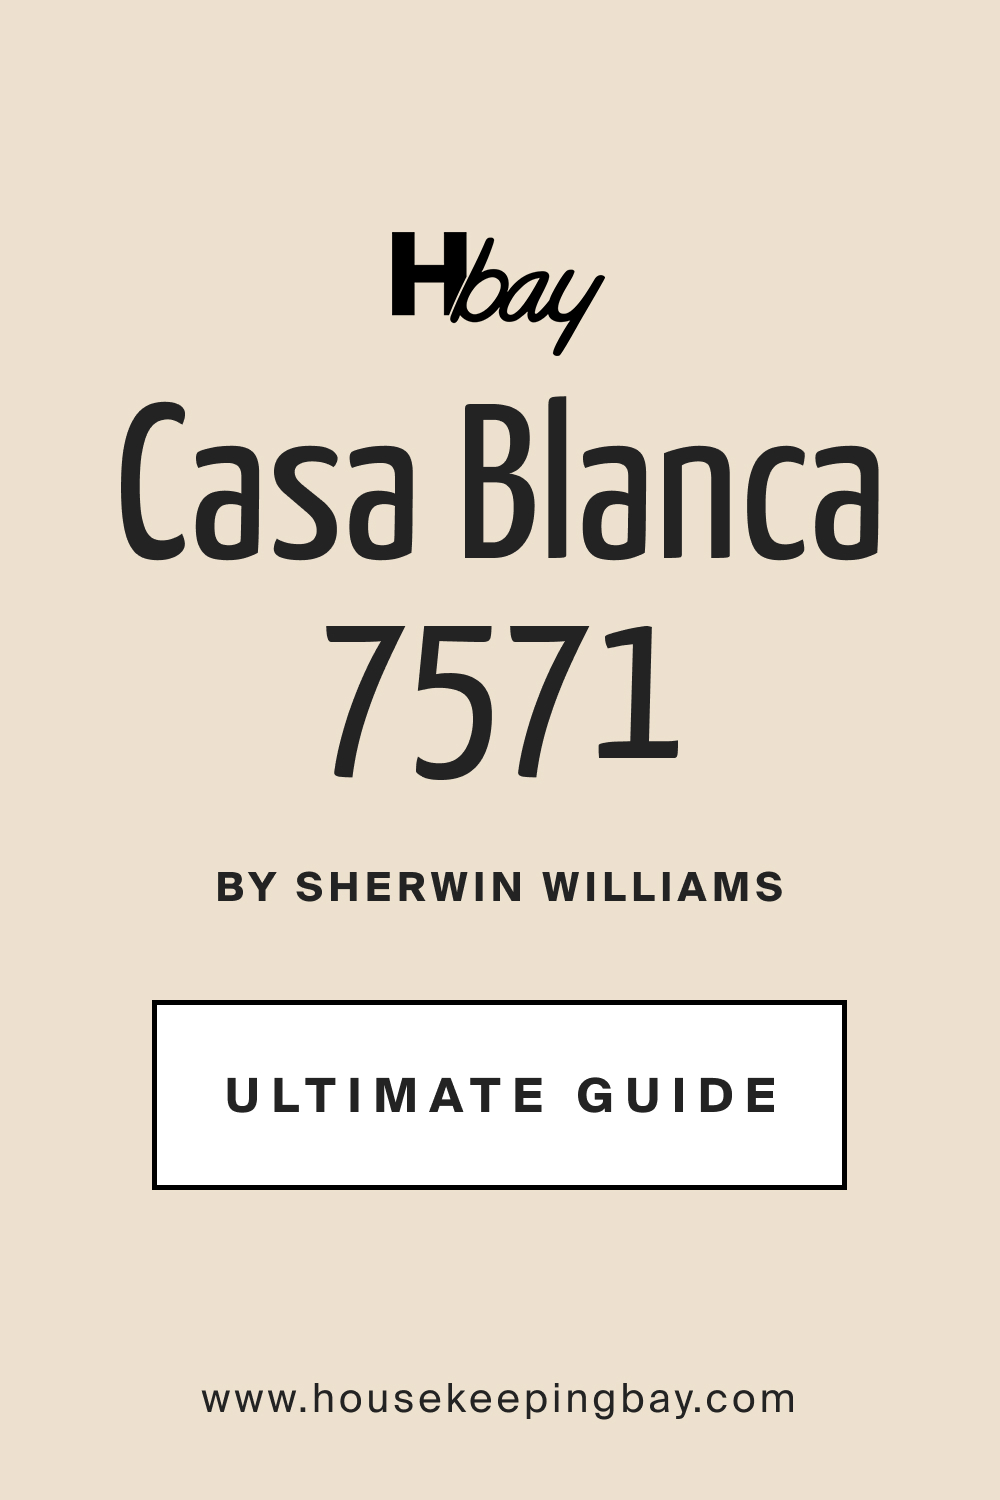 Casa Blanca 7571 Paint Color by Sherwin Williams Ultimate Guide